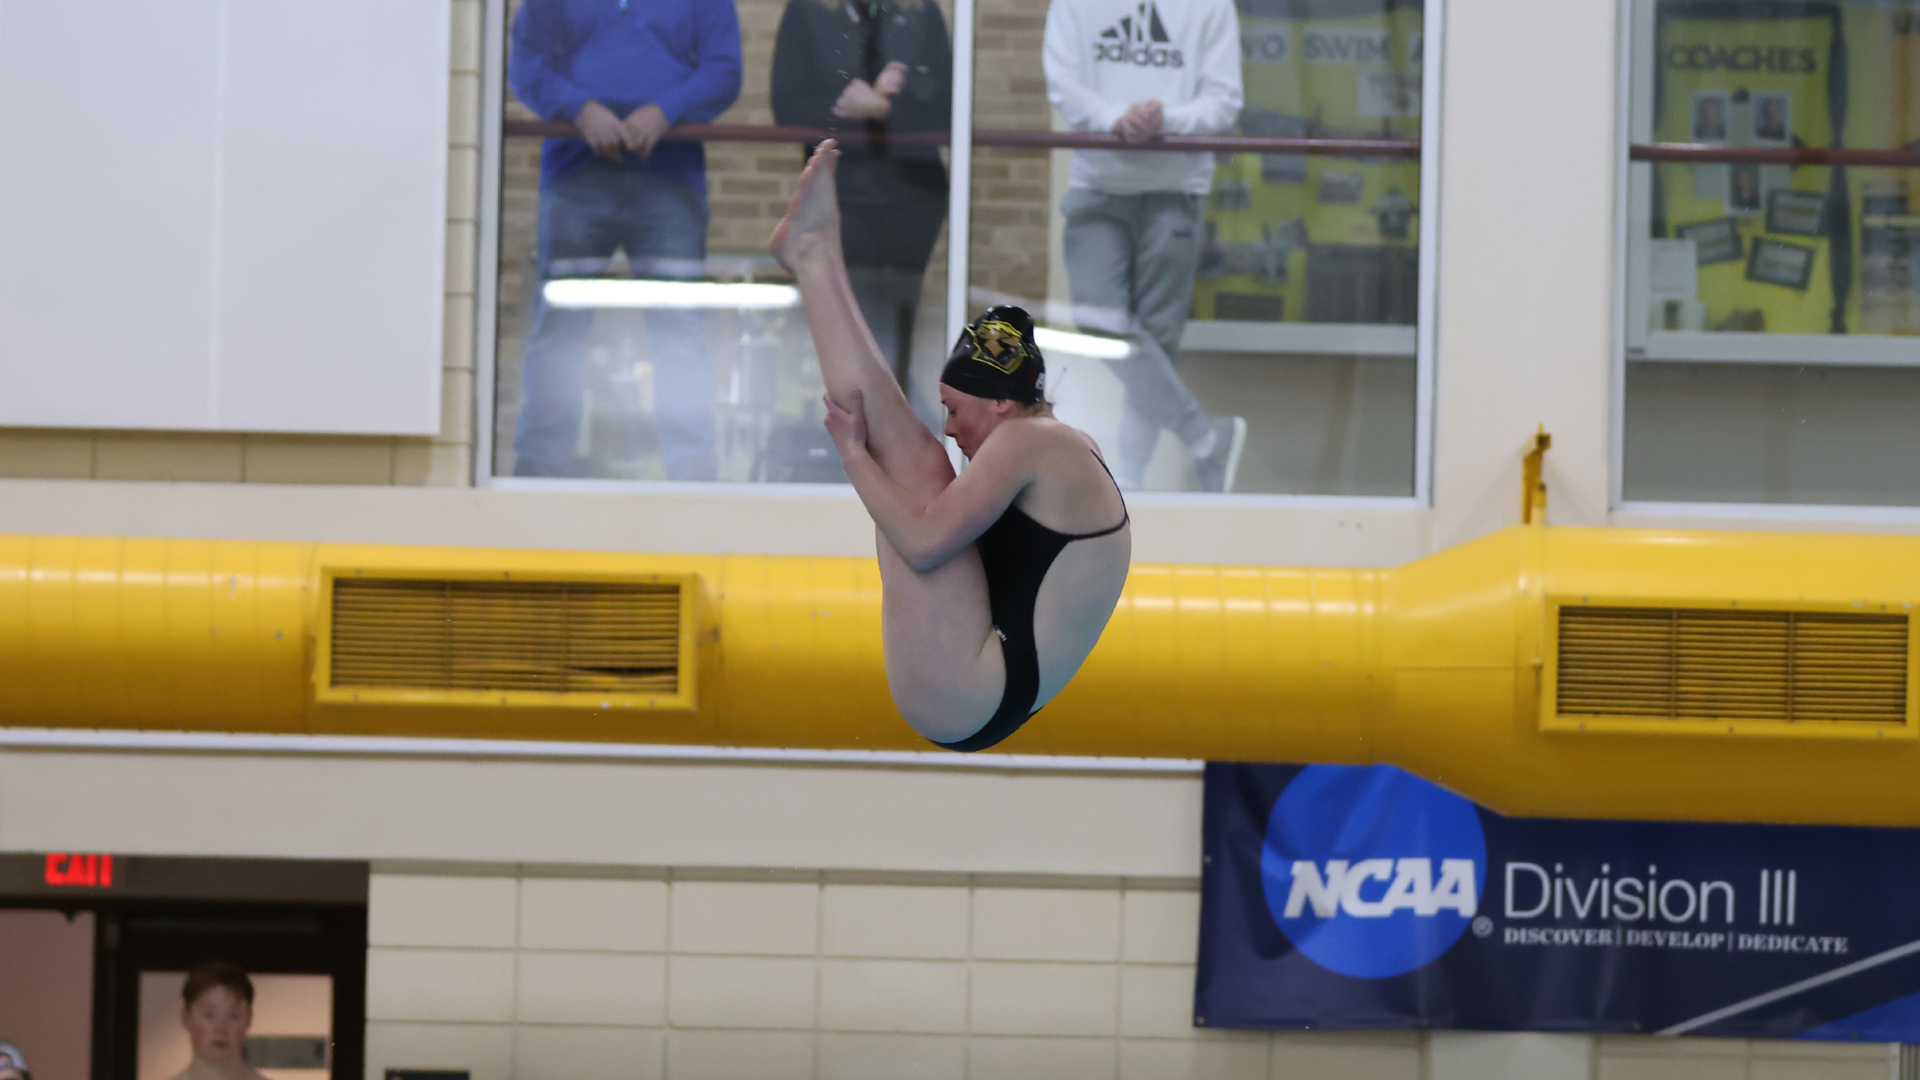 Abbi Priestley competed in both the 1- and 3-meter diving at the NCAA Division III Diving Regional on Friday and Saturday. Photo Credit: Steve Frommell, UW-Oshkosh Sports Information